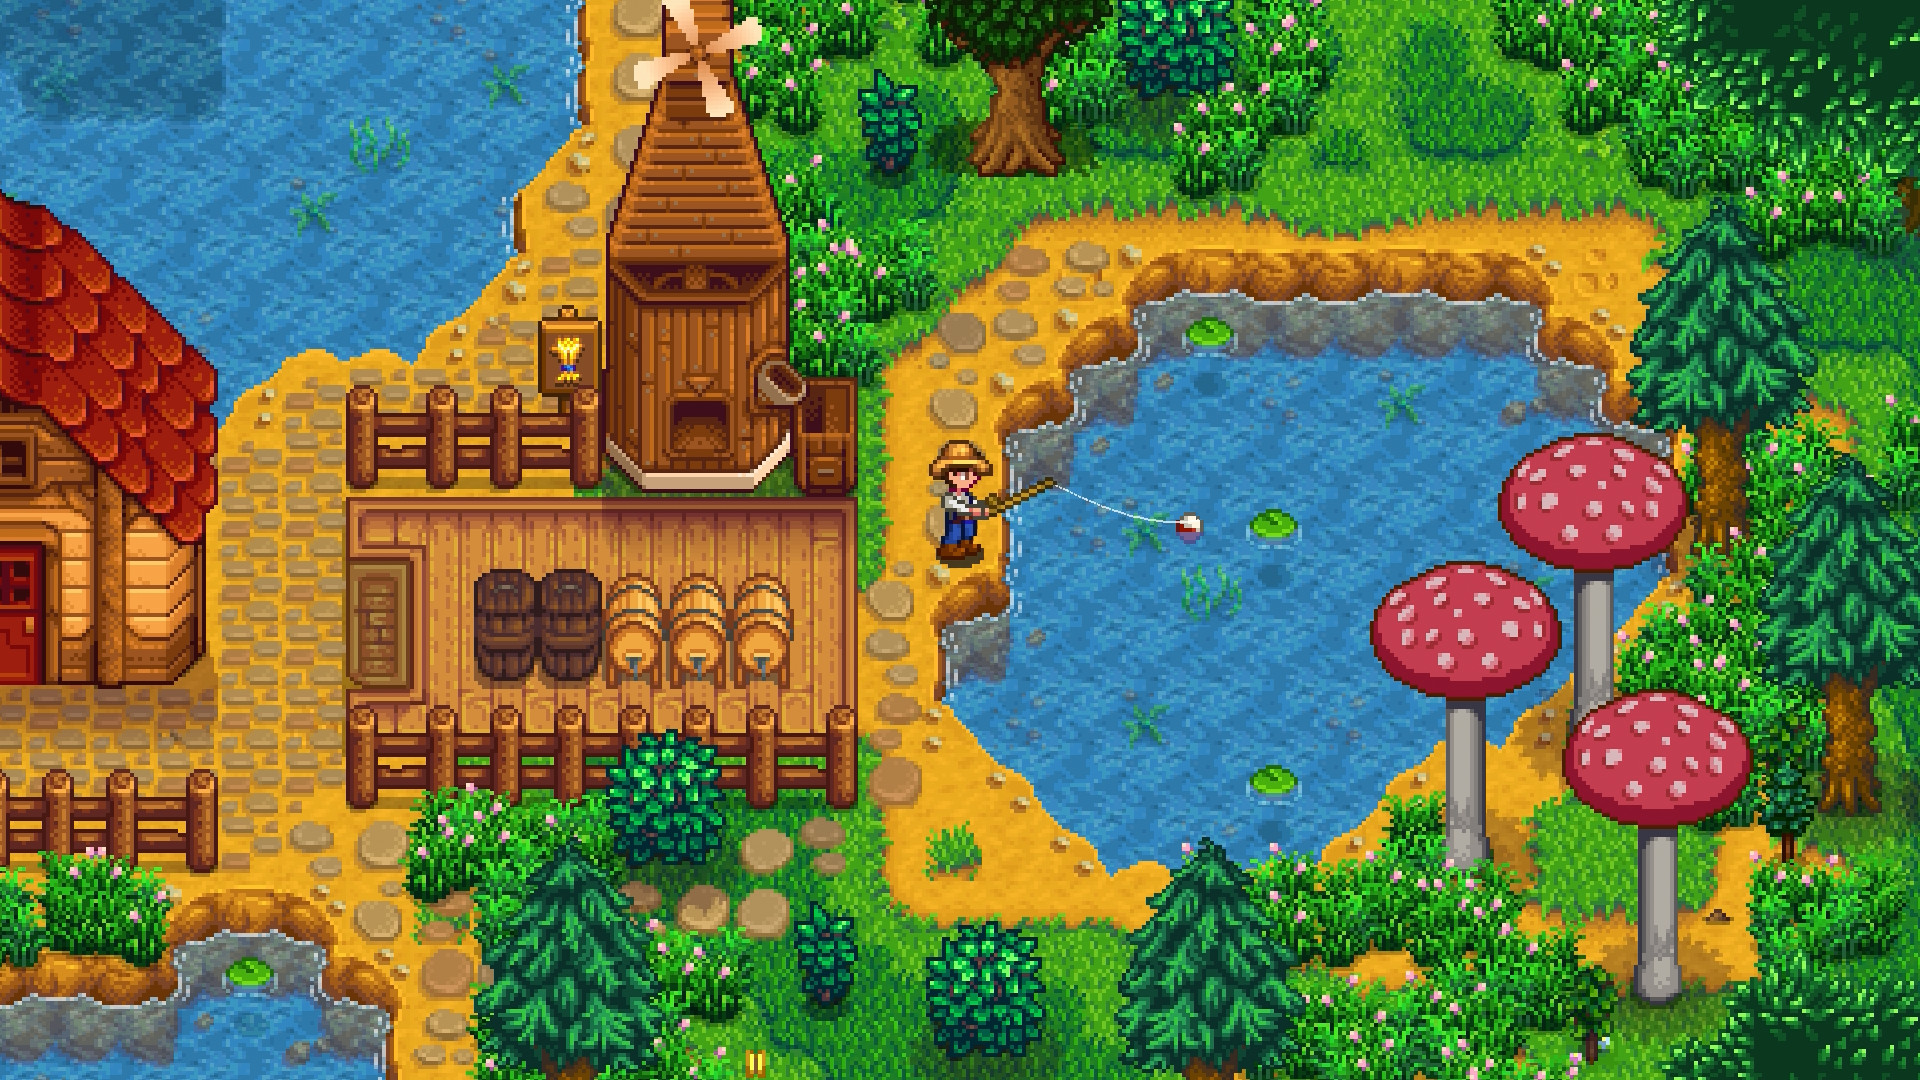 video games to play while stoned - Stardew Valley video game screenshot